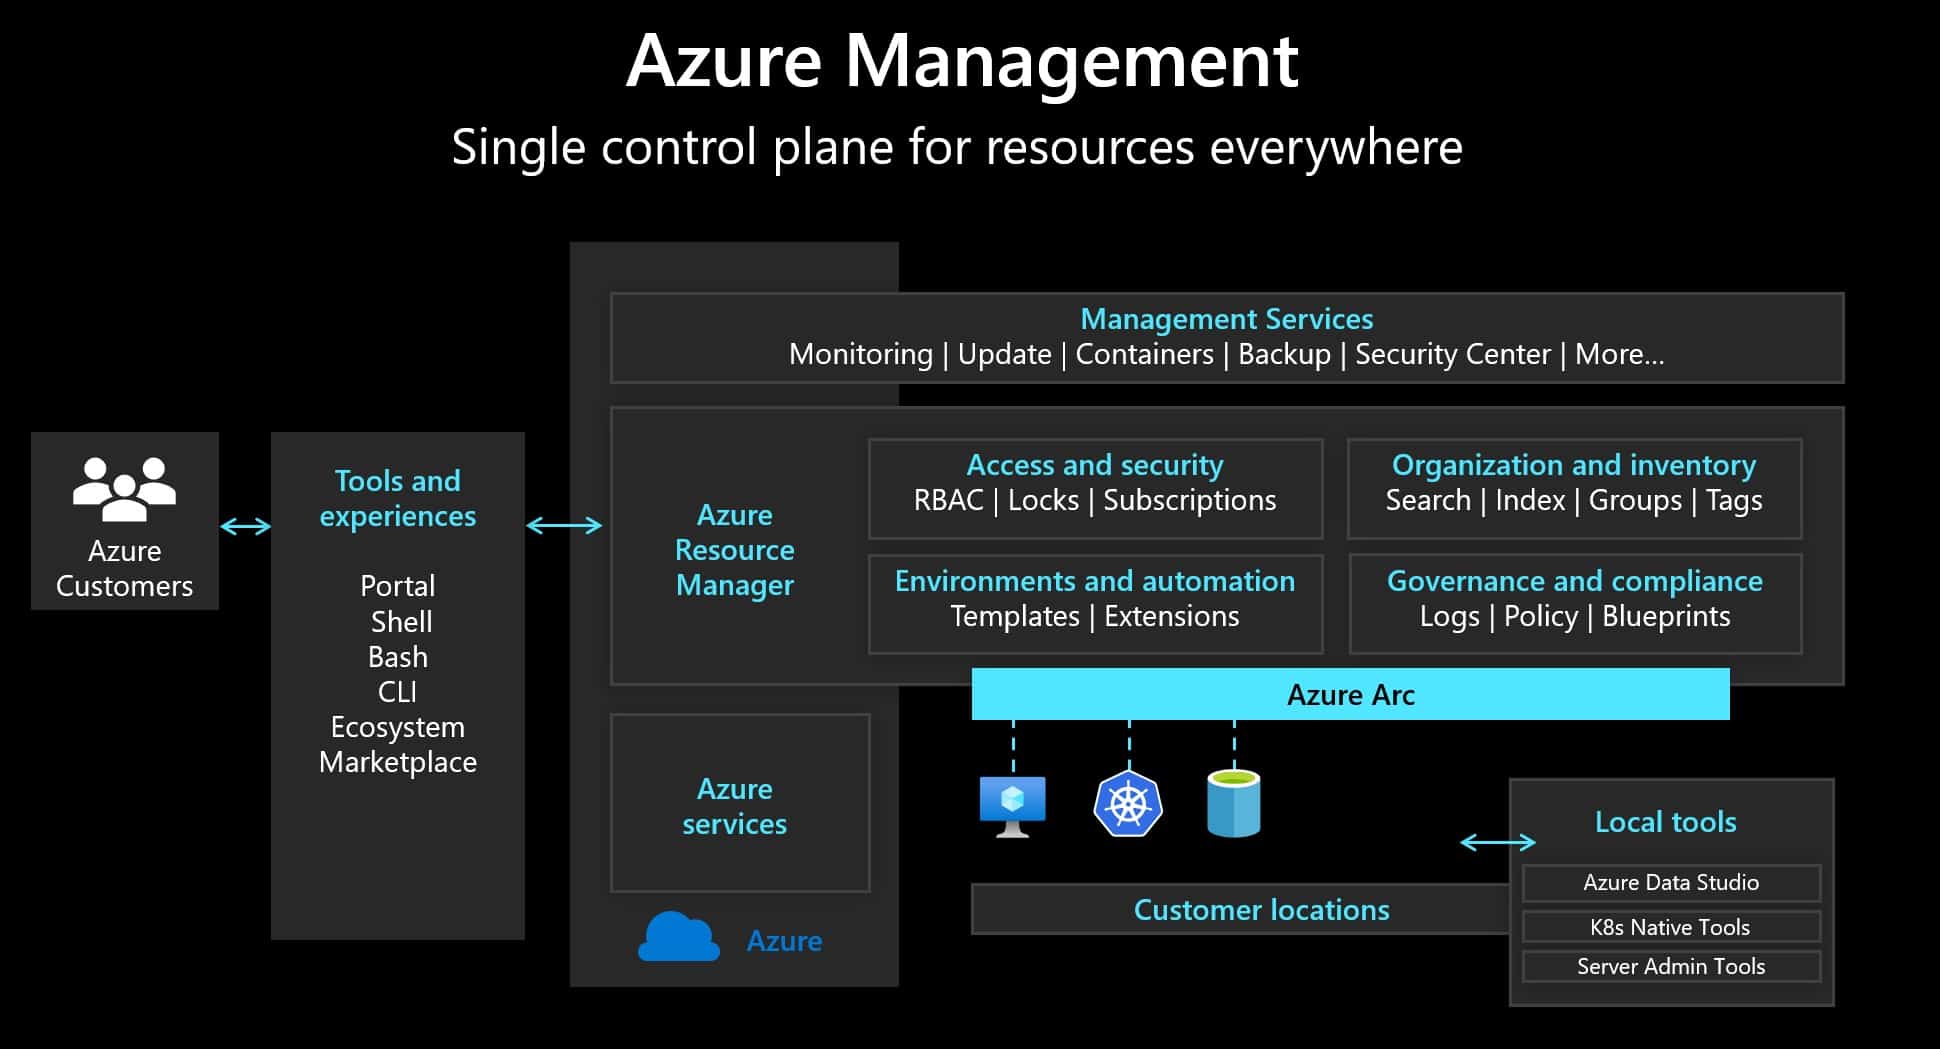 Azure Management - Single control plane for resources everywhere using Azure Arc